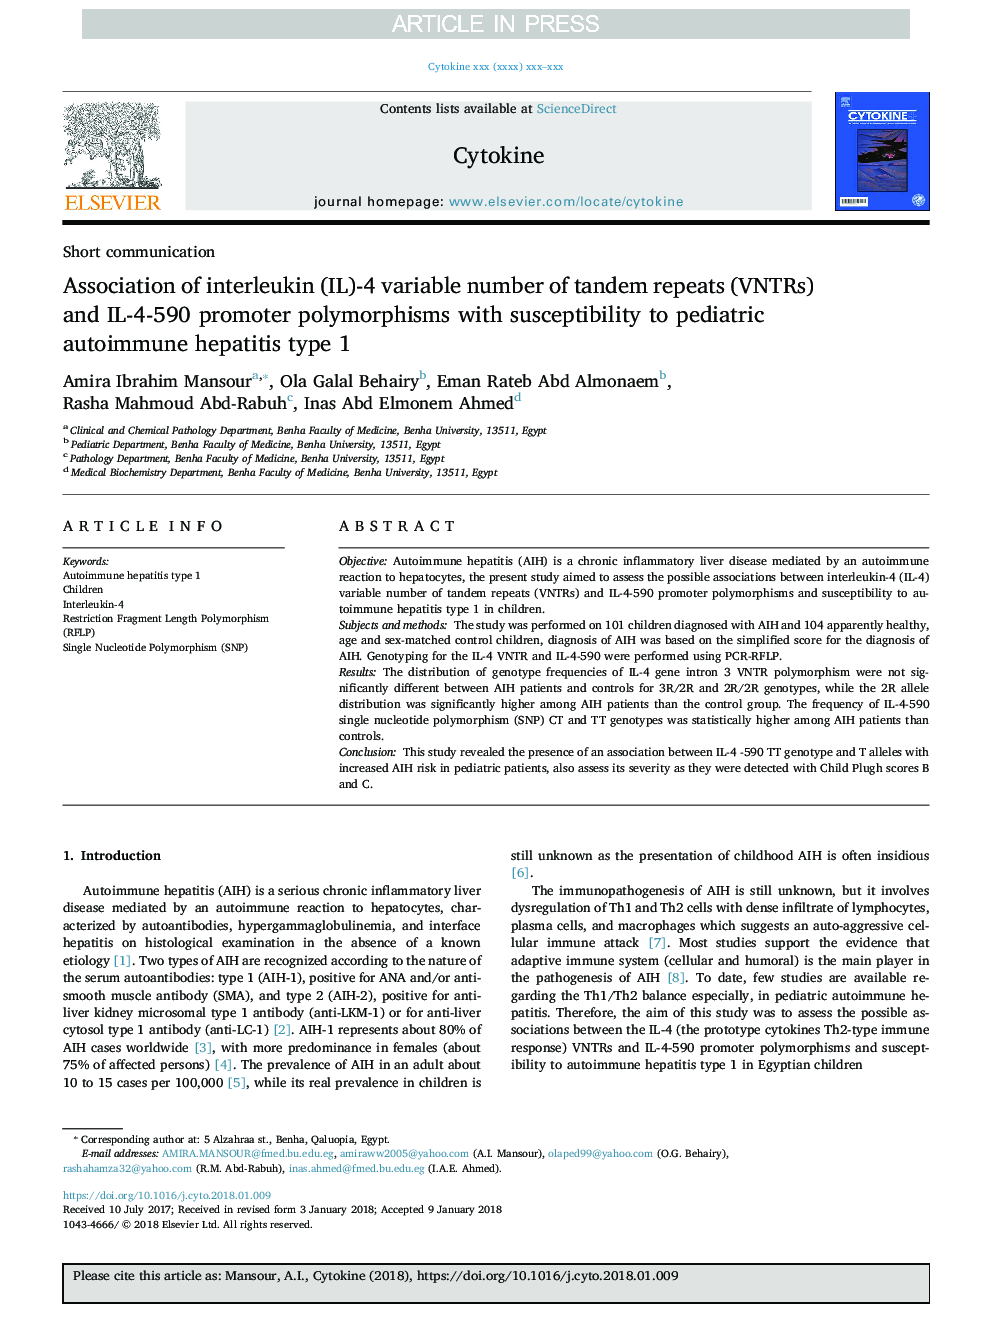 Association of interleukin (IL)-4 variable number of tandem repeats (VNTRs) and IL-4-590 promoter polymorphisms with susceptibility to pediatric autoimmune hepatitis type 1